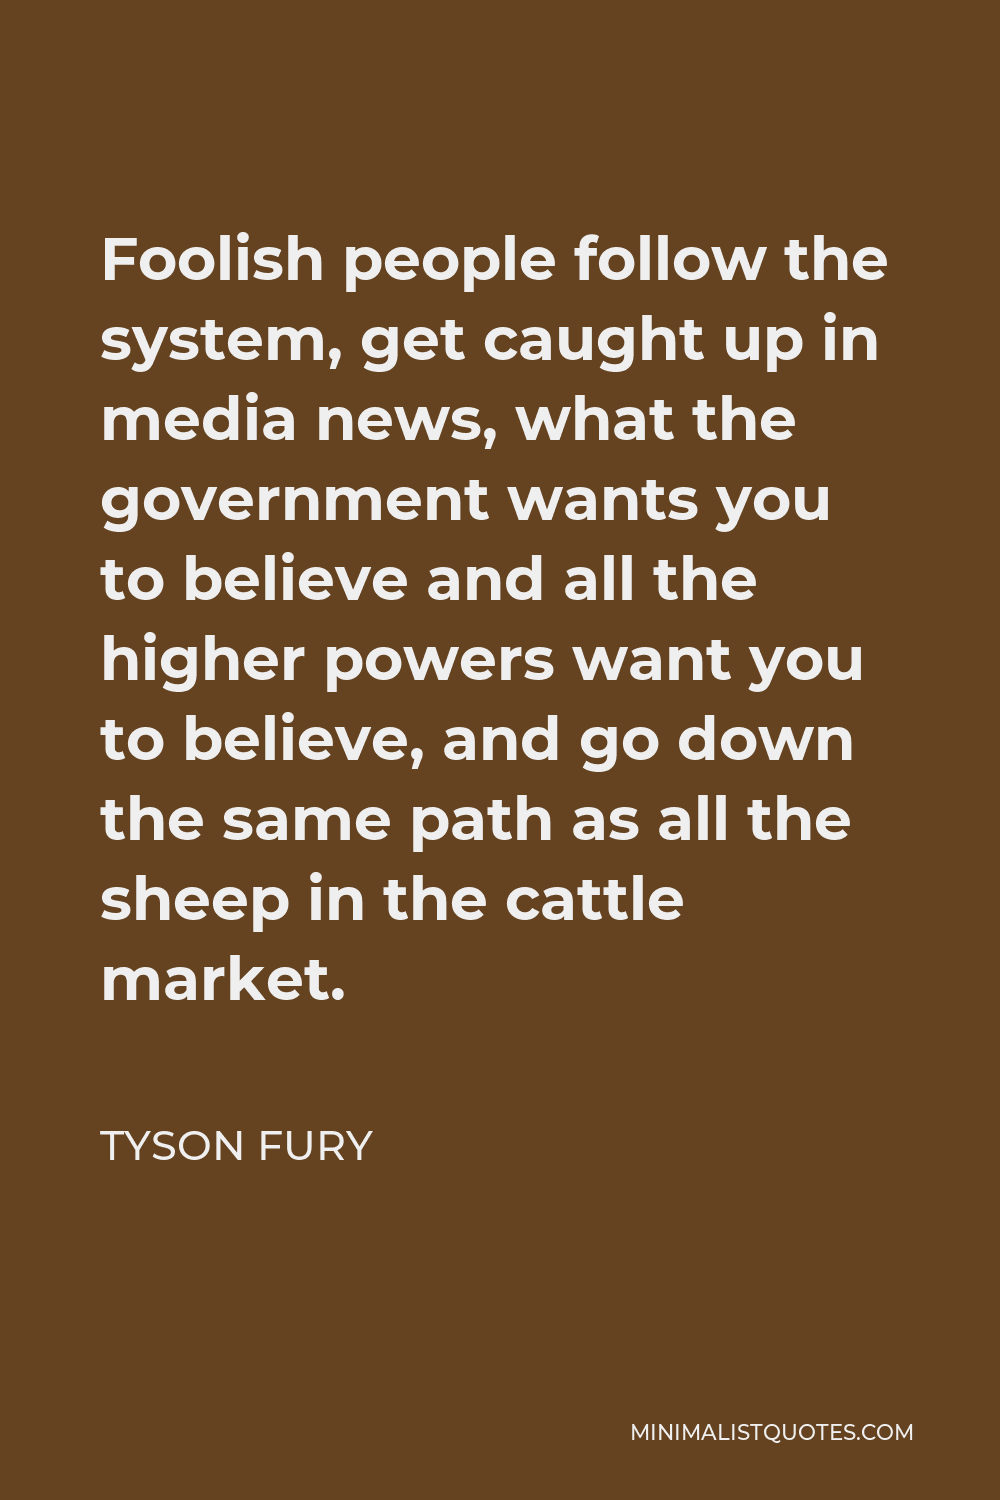 Tyson Fury Quote - Foolish people follow the system, get caught up in media news, what the government wants you to believe and all the higher powers want you to believe, and go down the same path as all the sheep in the cattle market.